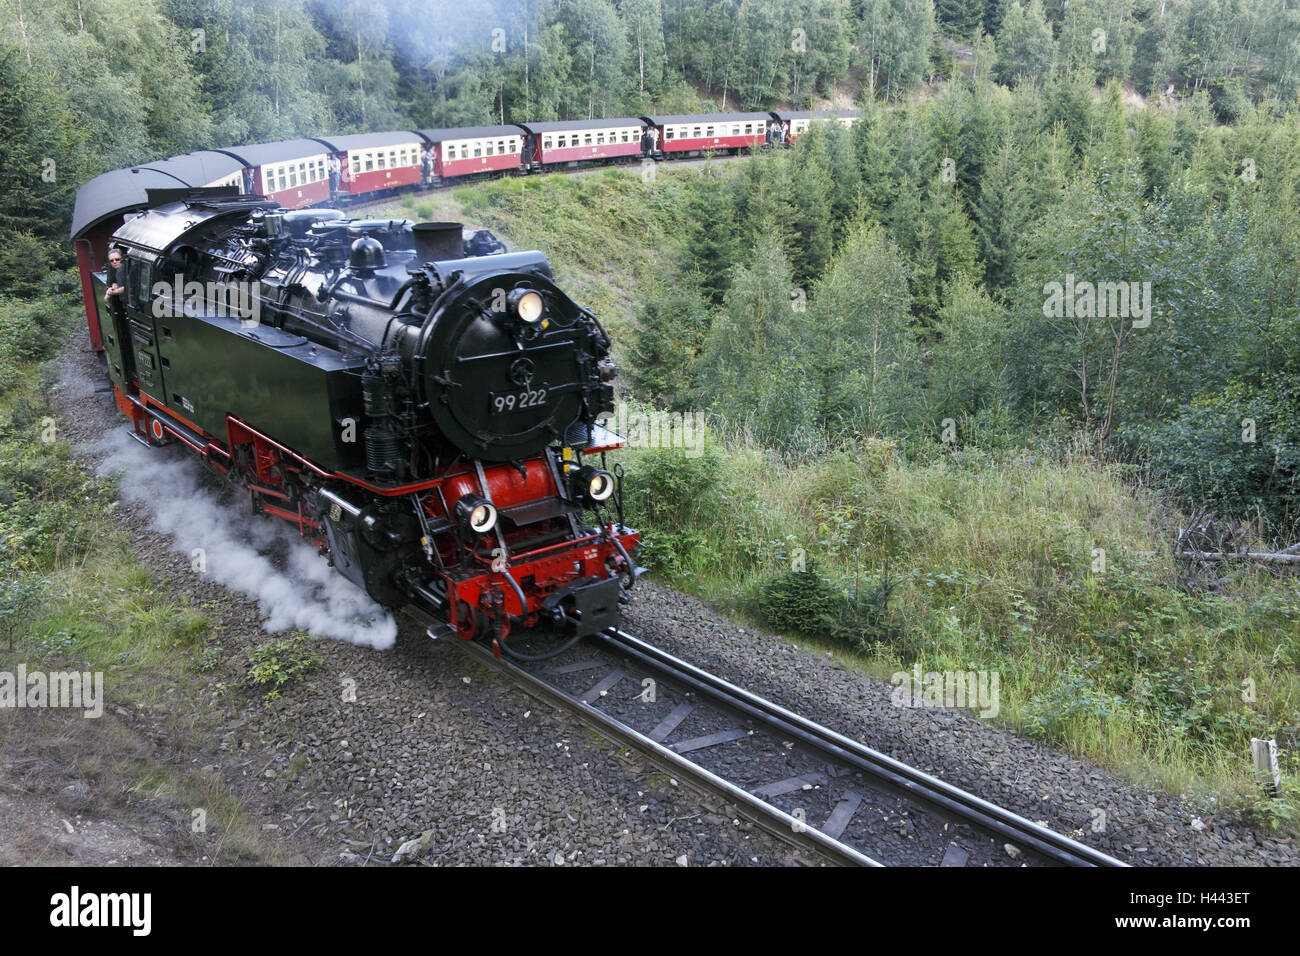 Rice train, steam locomotive, 99 222, year manufacture in 1931, travel train, resinous-across trajectory and lump trajectory, wood, compulsion valley, scenery, Stock Photo